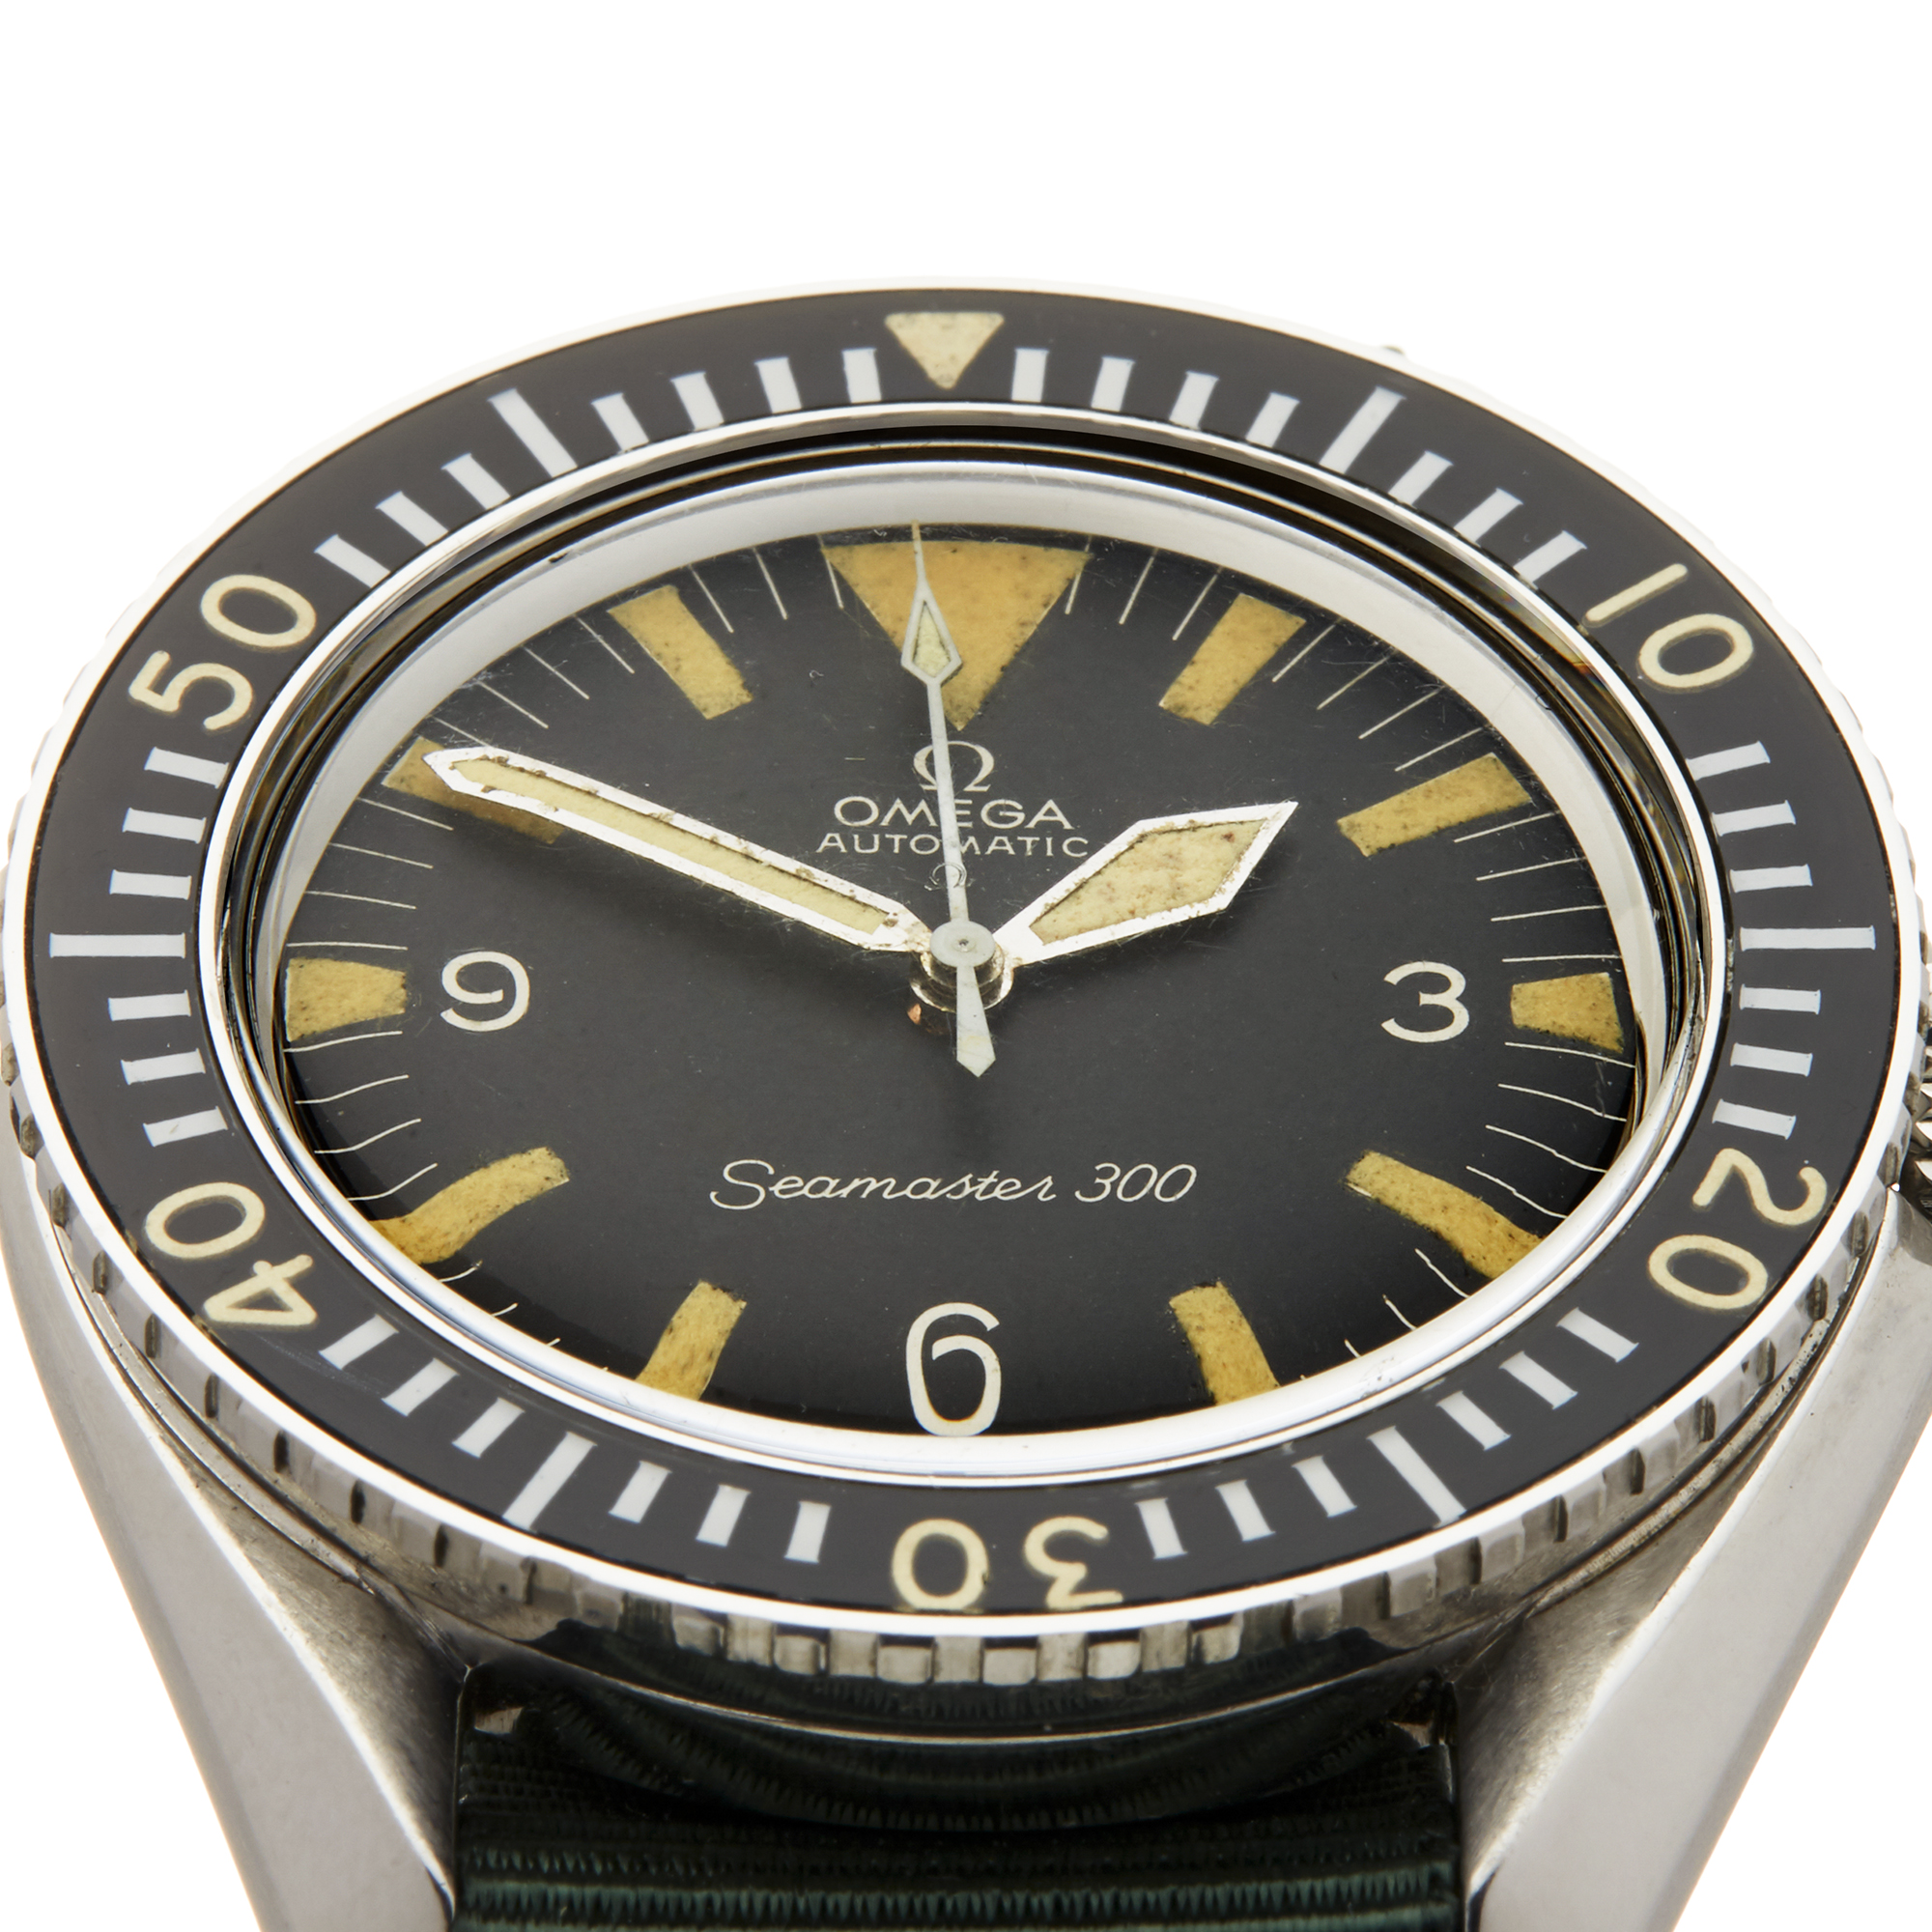 1967 Omega Seamaster 300 Military Stainless Steel - ST 165.024 - Image 7 of 9